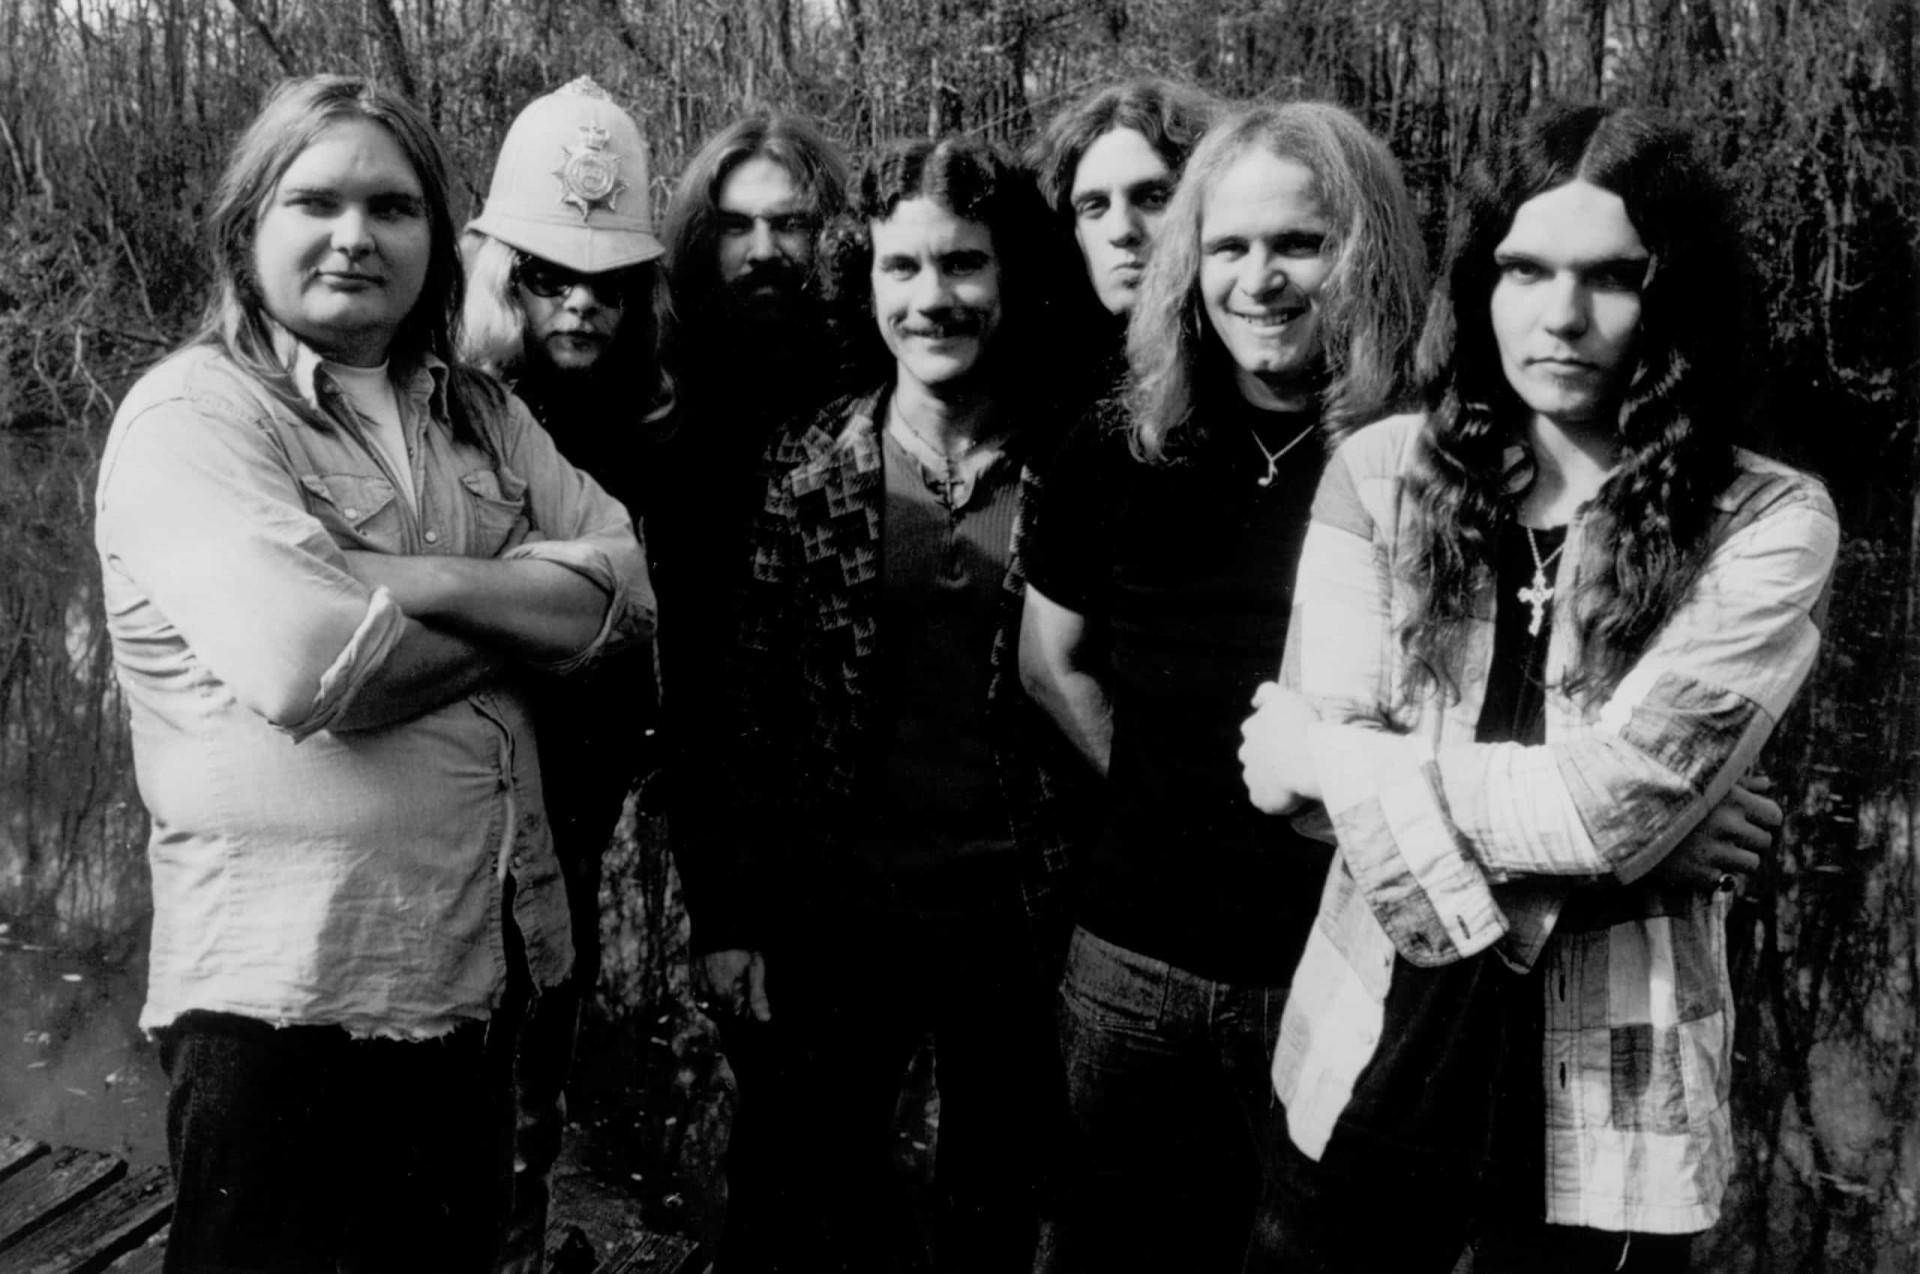 <p>'Free Bird' appeared on Lynyrd Skynyrd's debut album in 1973. It is the band's signature song and often played out as a prolonged finale during live performances in tribute to those members of the group who perished in an air crash in 1977.</p><p>You may also like:<a href="https://www.starsinsider.com/n/252683?utm_source=msn.com&utm_medium=display&utm_campaign=referral_description&utm_content=603256en-my"> Everything you want to know about polyamorous relationships </a></p>